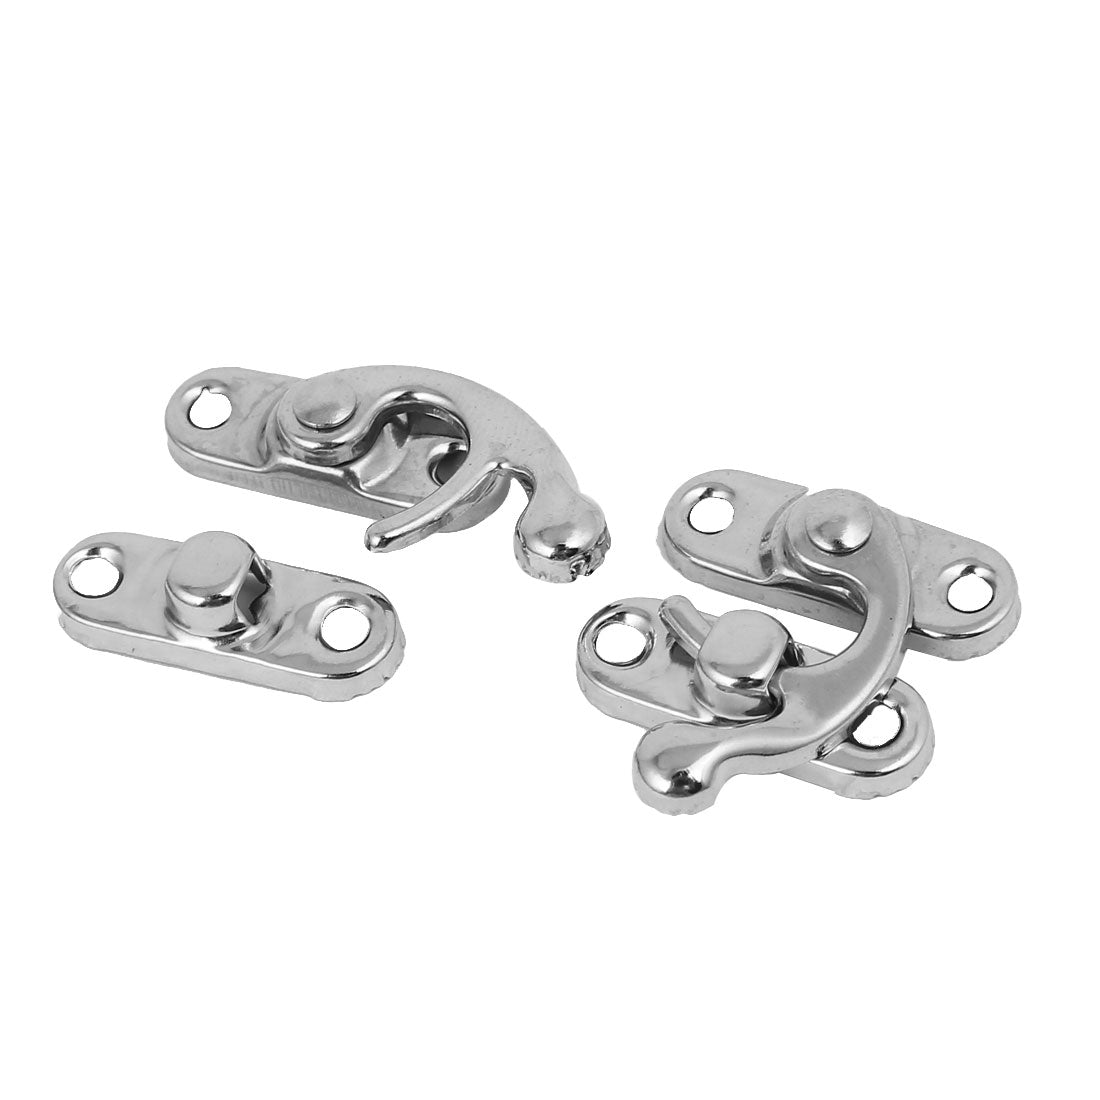 uxcell Uxcell Wine Box Chest Hook Latch Buckle Catch Toggle Hasp Silver Tone 5pcs